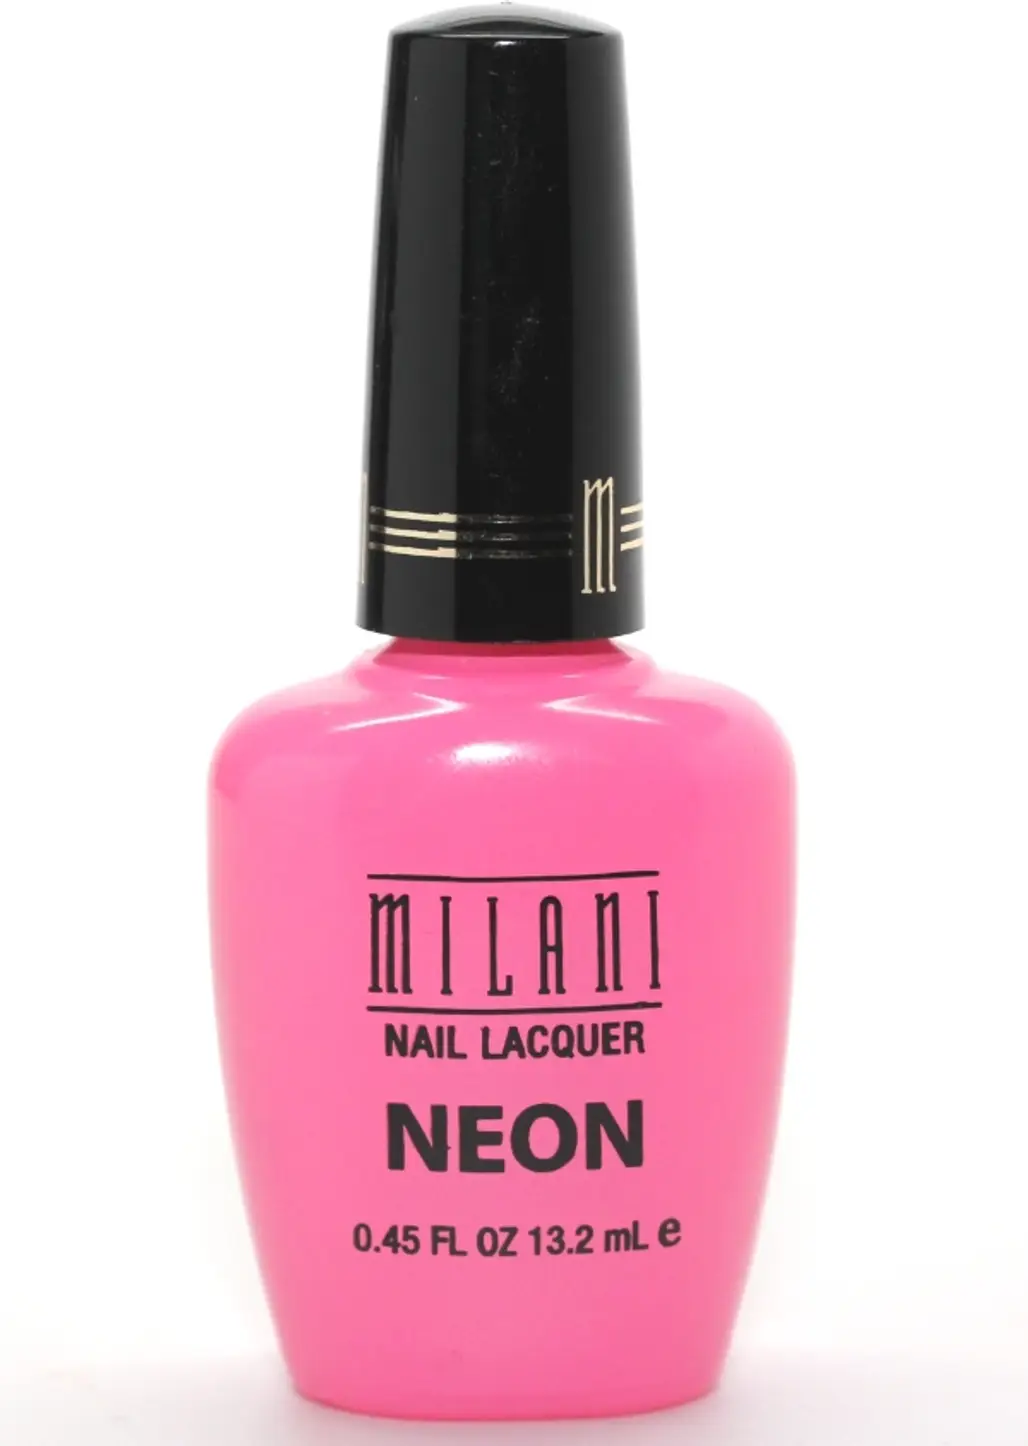 Milani Neon Nail Lacquer in Pink Hottie